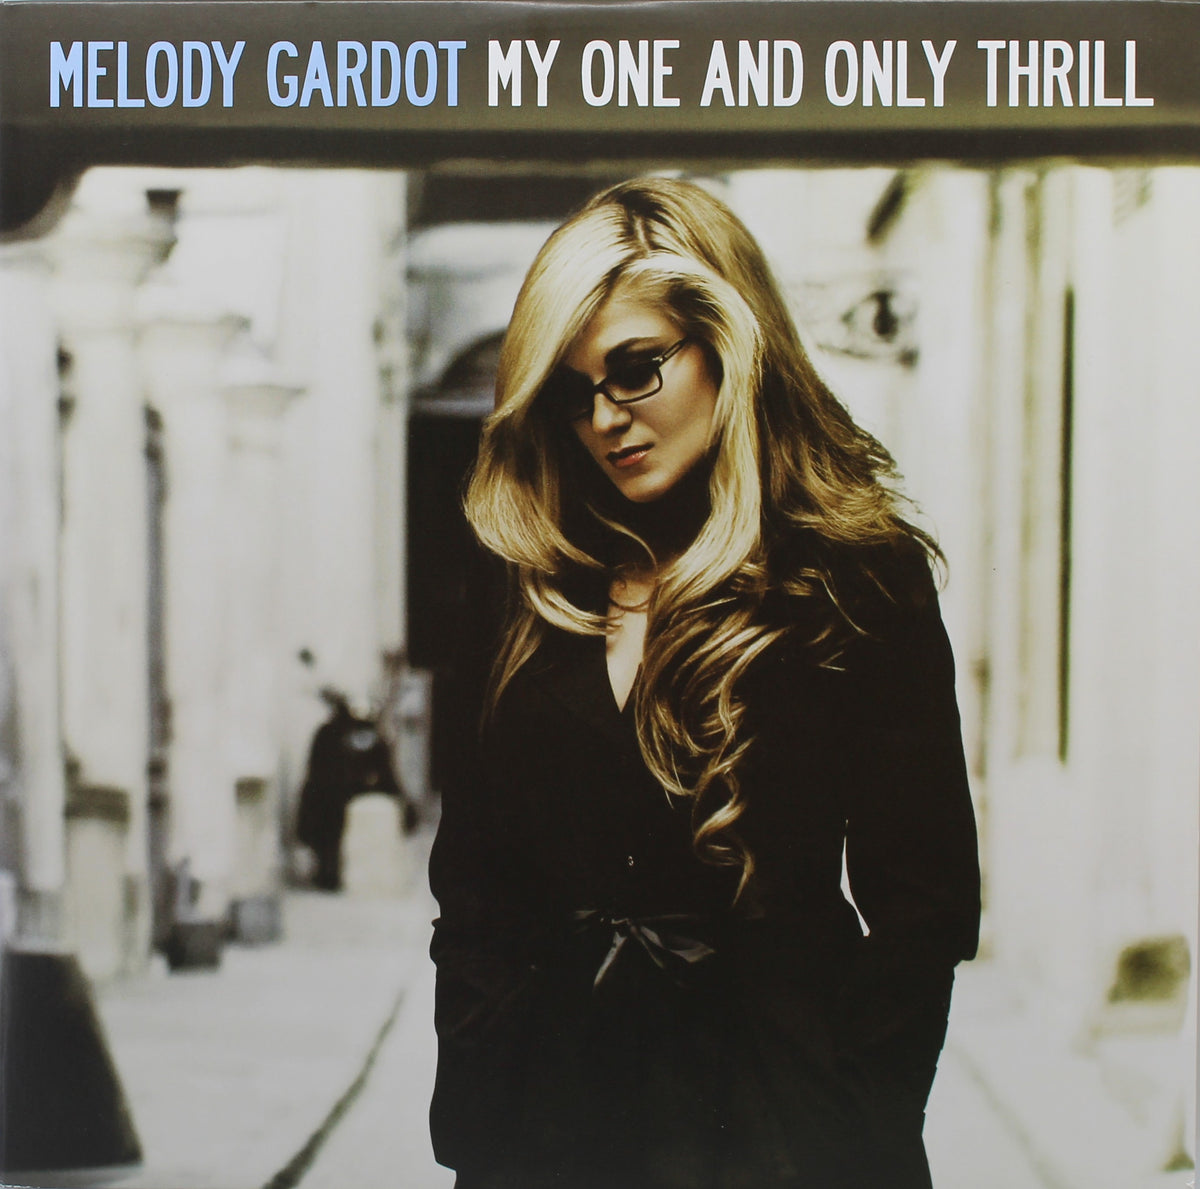 Melody Gardot ‎– My One And Only Thrill, 2 × Vinyl, LP, Jazz, 45 RPM, Album, Limited Edition, Numbered, Stereo, 180g, USA 2014